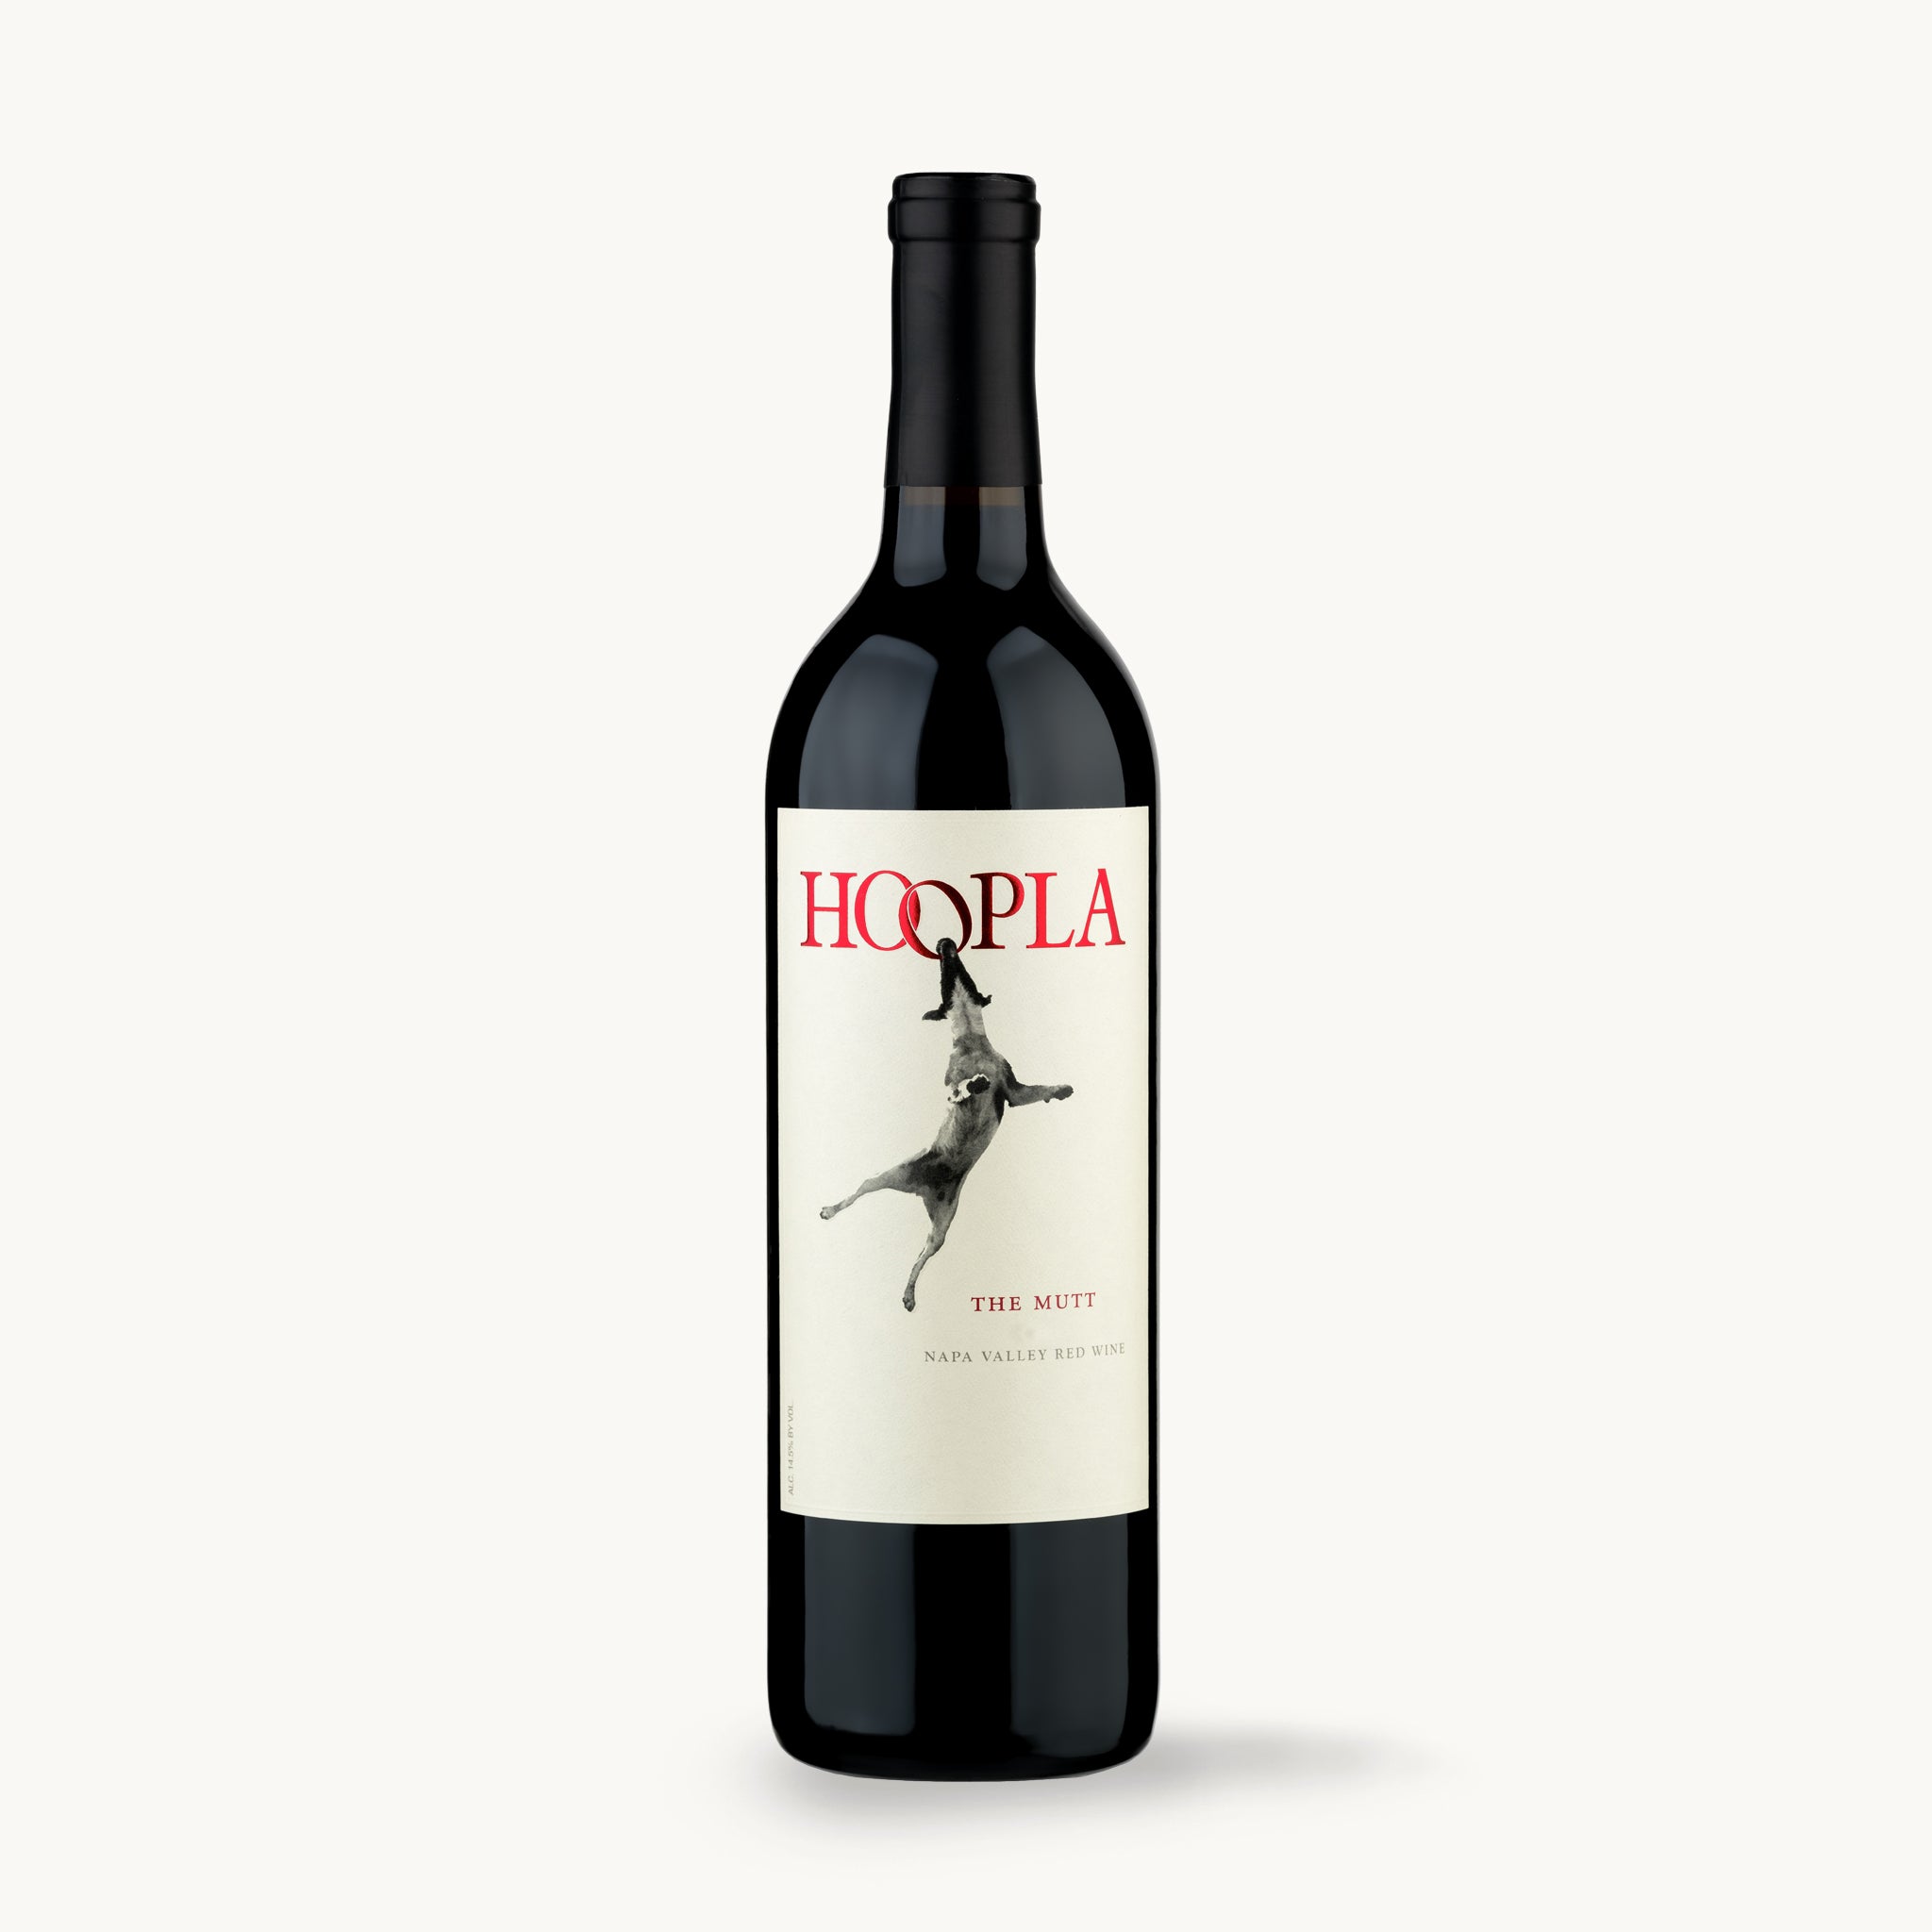 Hoopla "The Mutt" Red Blend, Napa Valley 2015